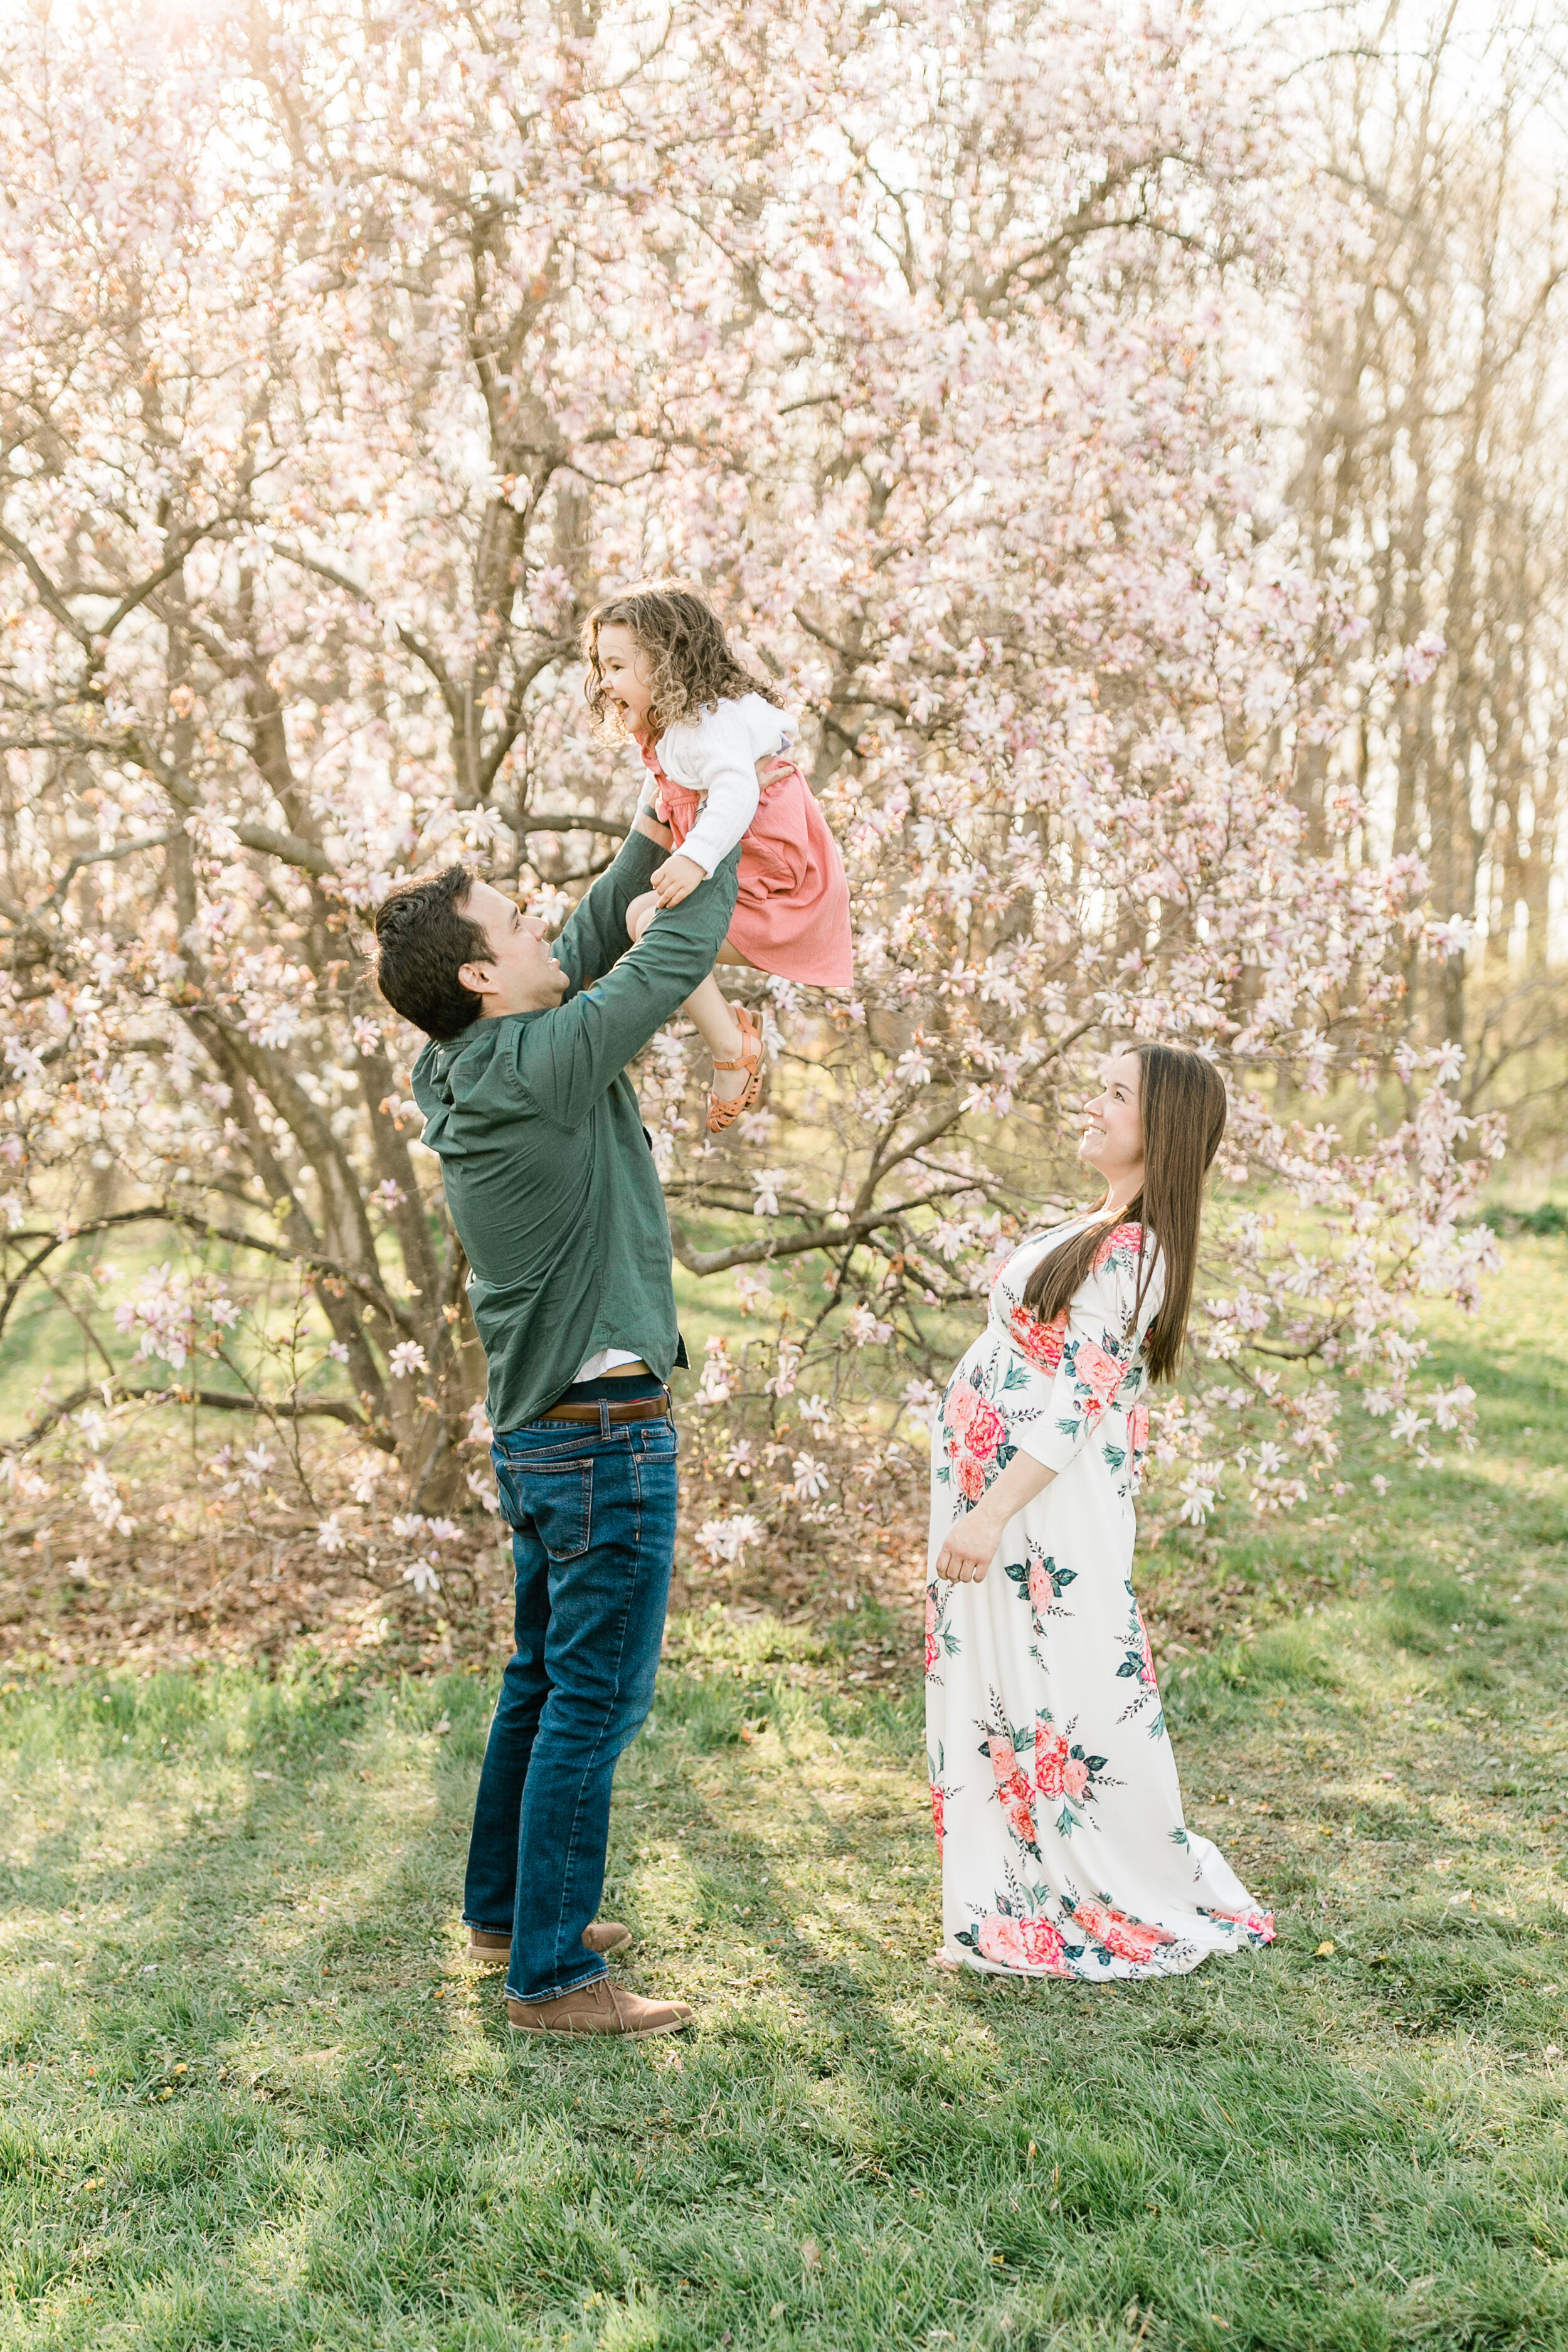 vanessa wyler photography magnolia spring blooms maternity mini session